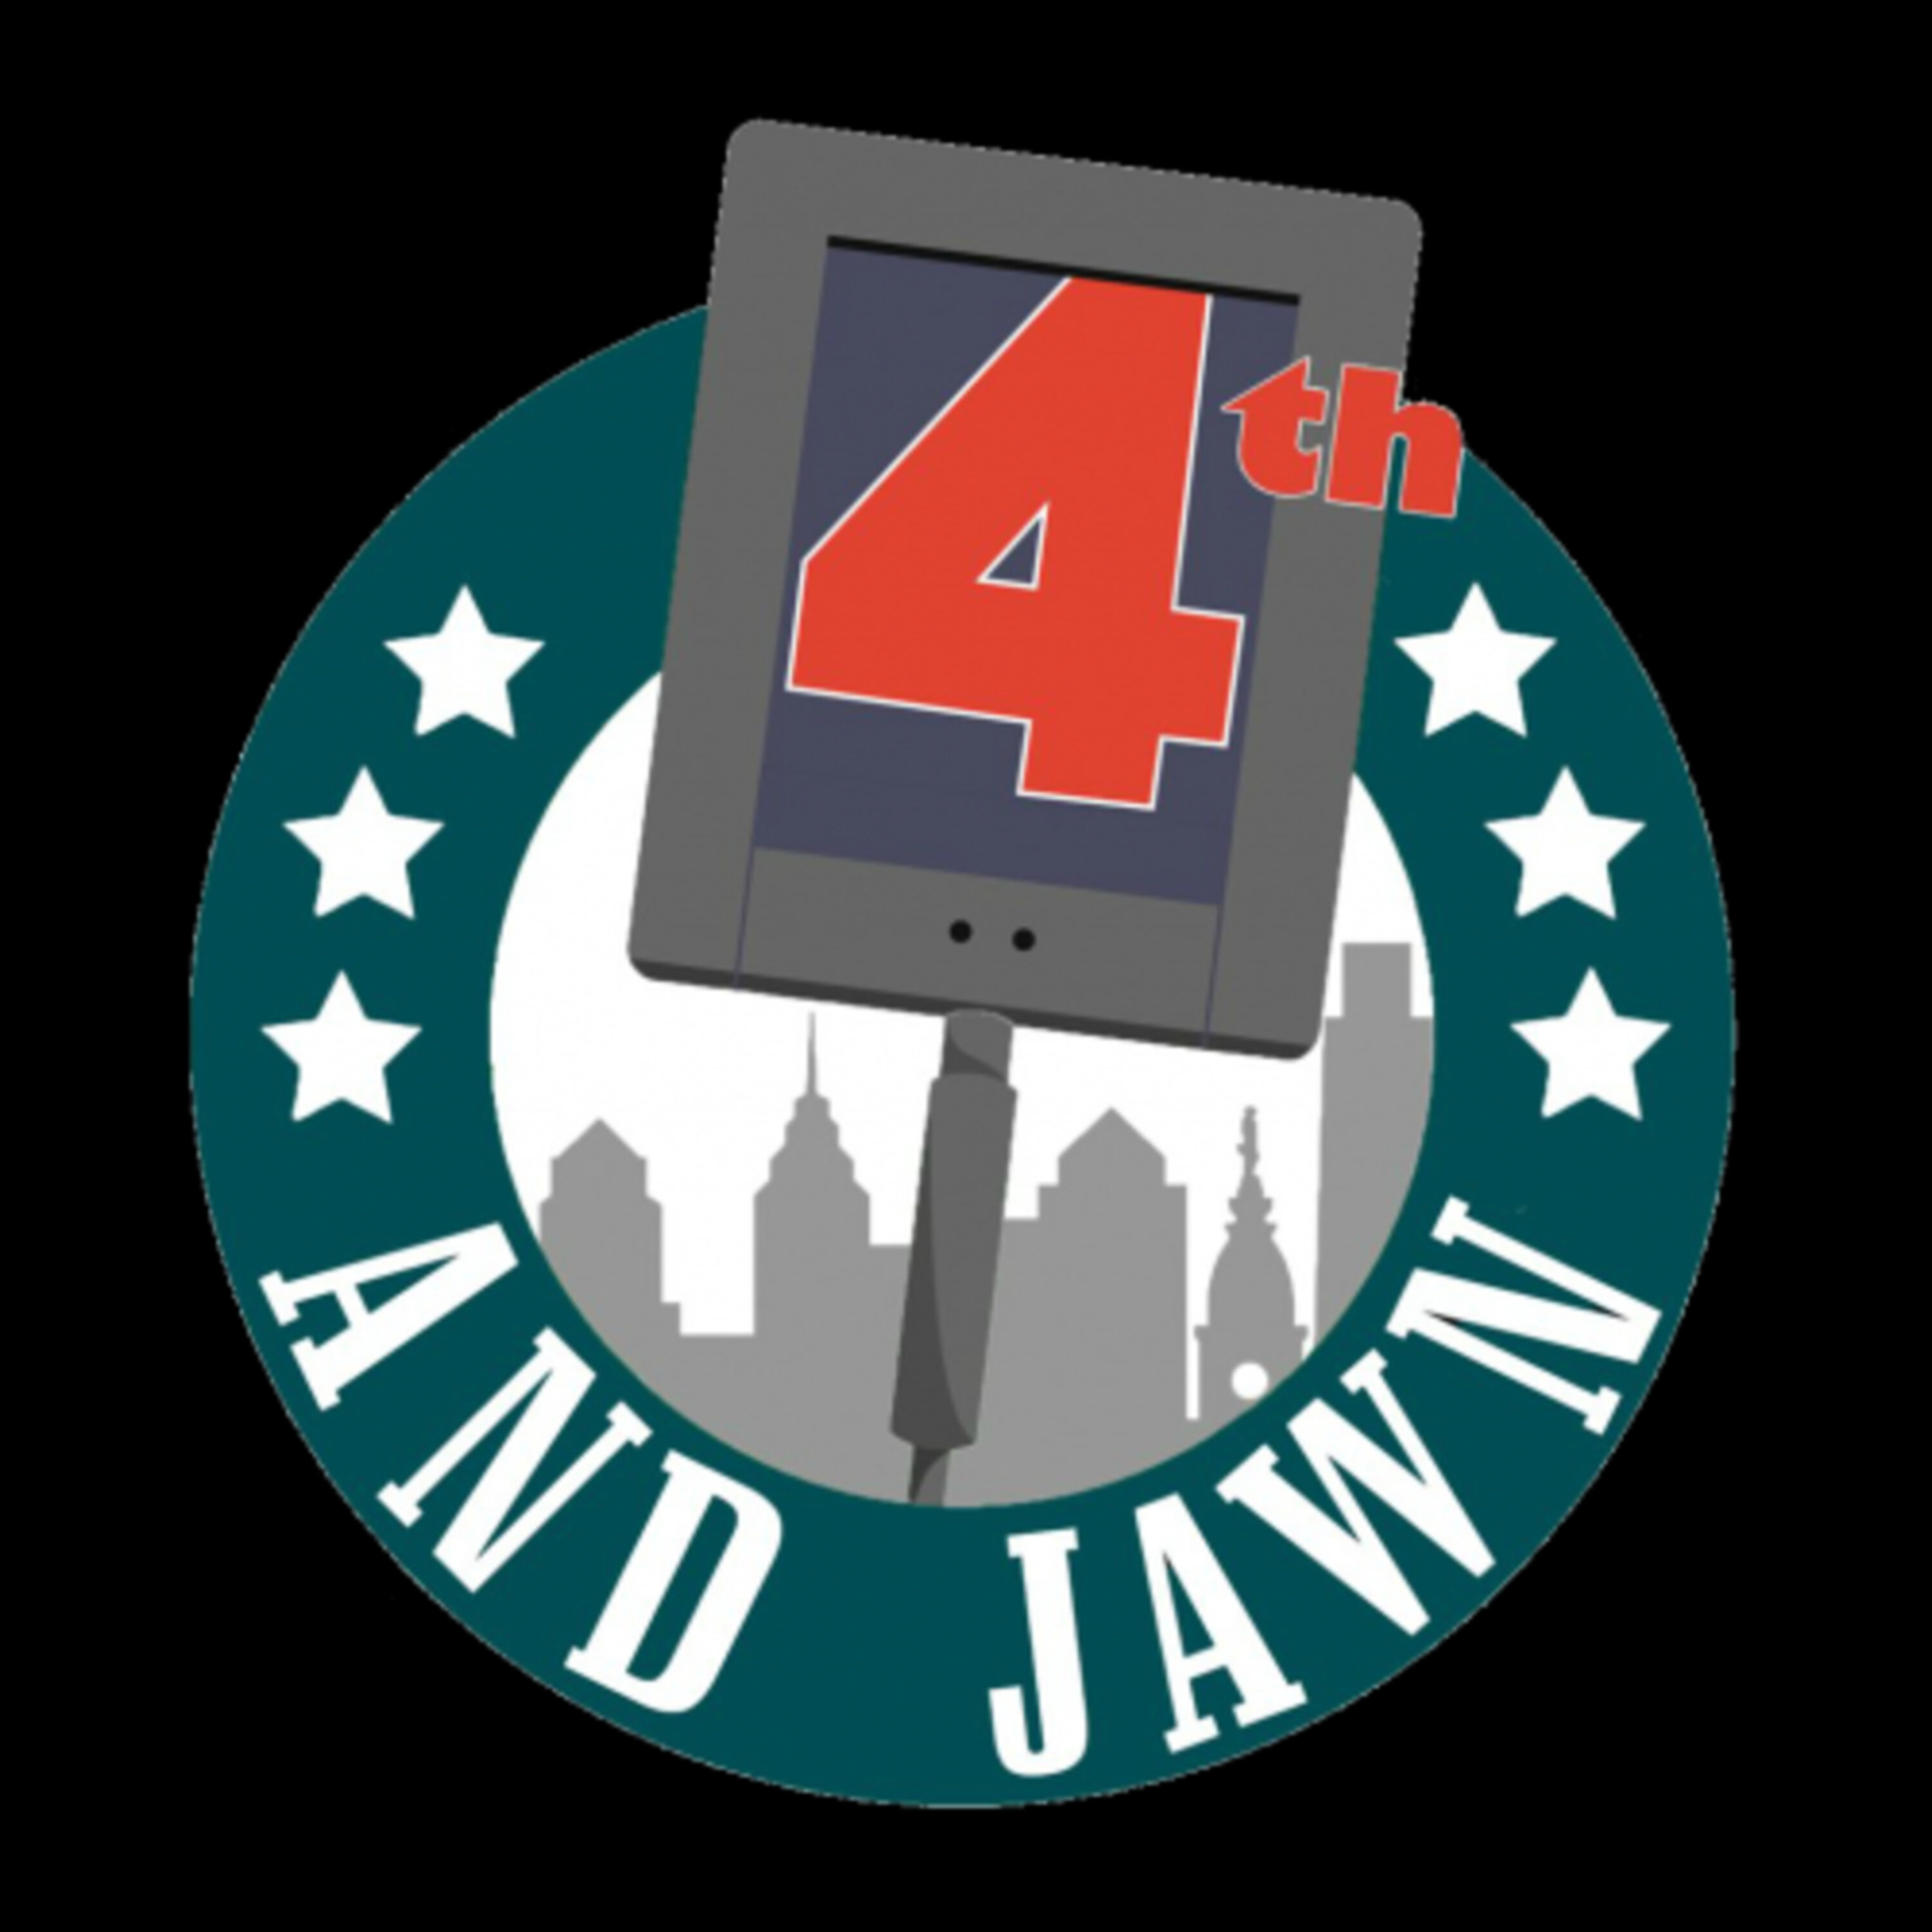 4th and JAWN – Episode 45: Phinally, We Are The Champions!